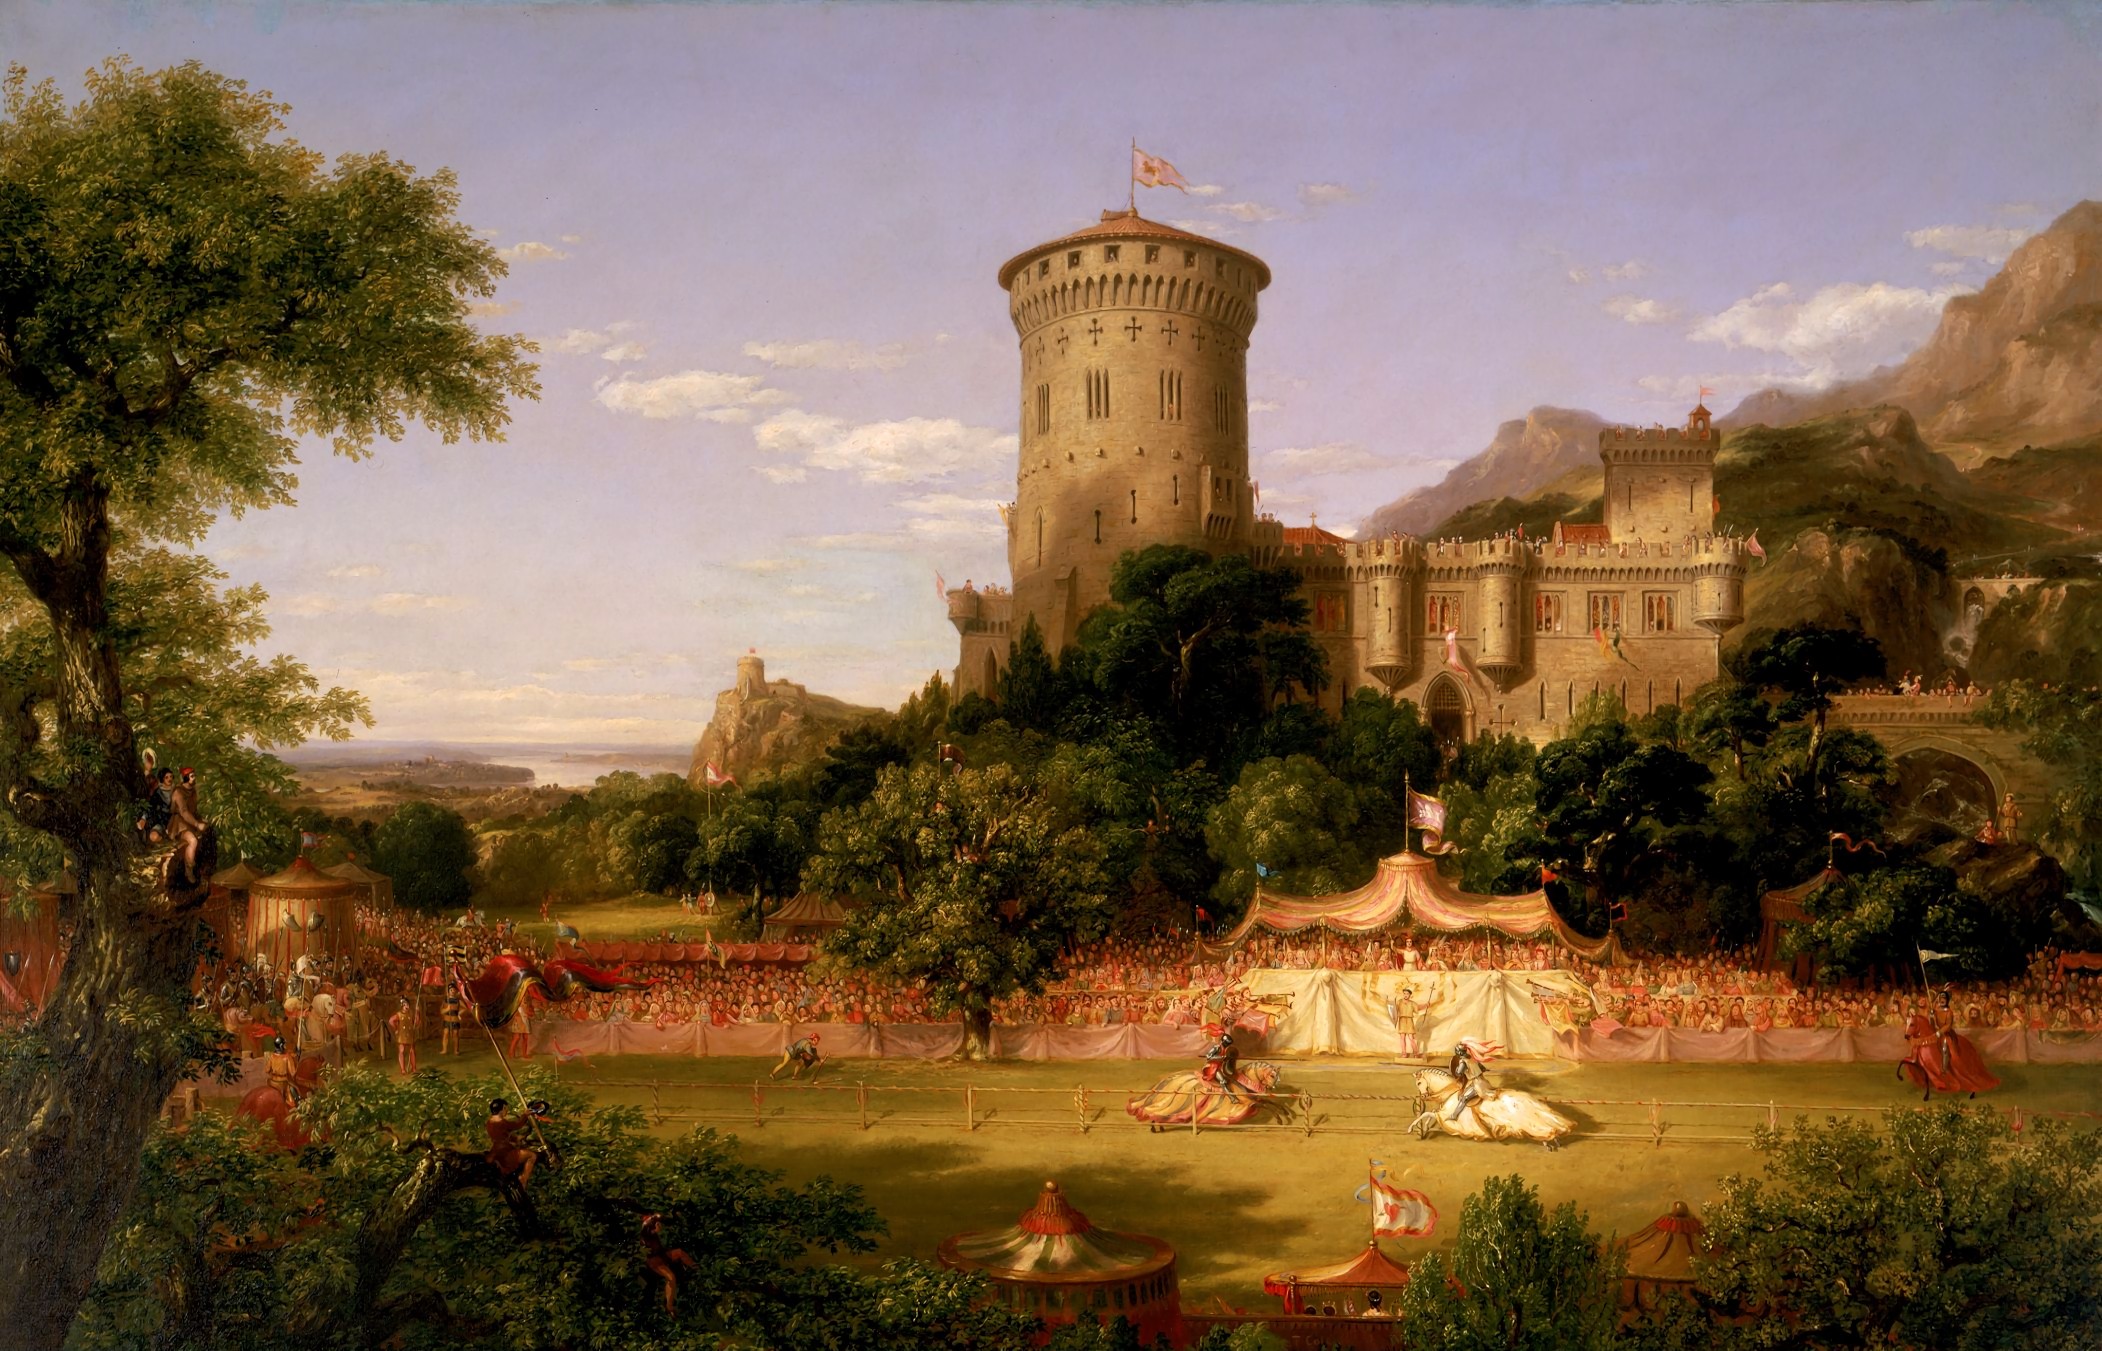 knight, Crowds, Thomas Cole, Architecture, Building, Painting, Artwork, Castle, Horse, Trees, Nature, Flag, Tower, Tent, Mountains Wallpaper